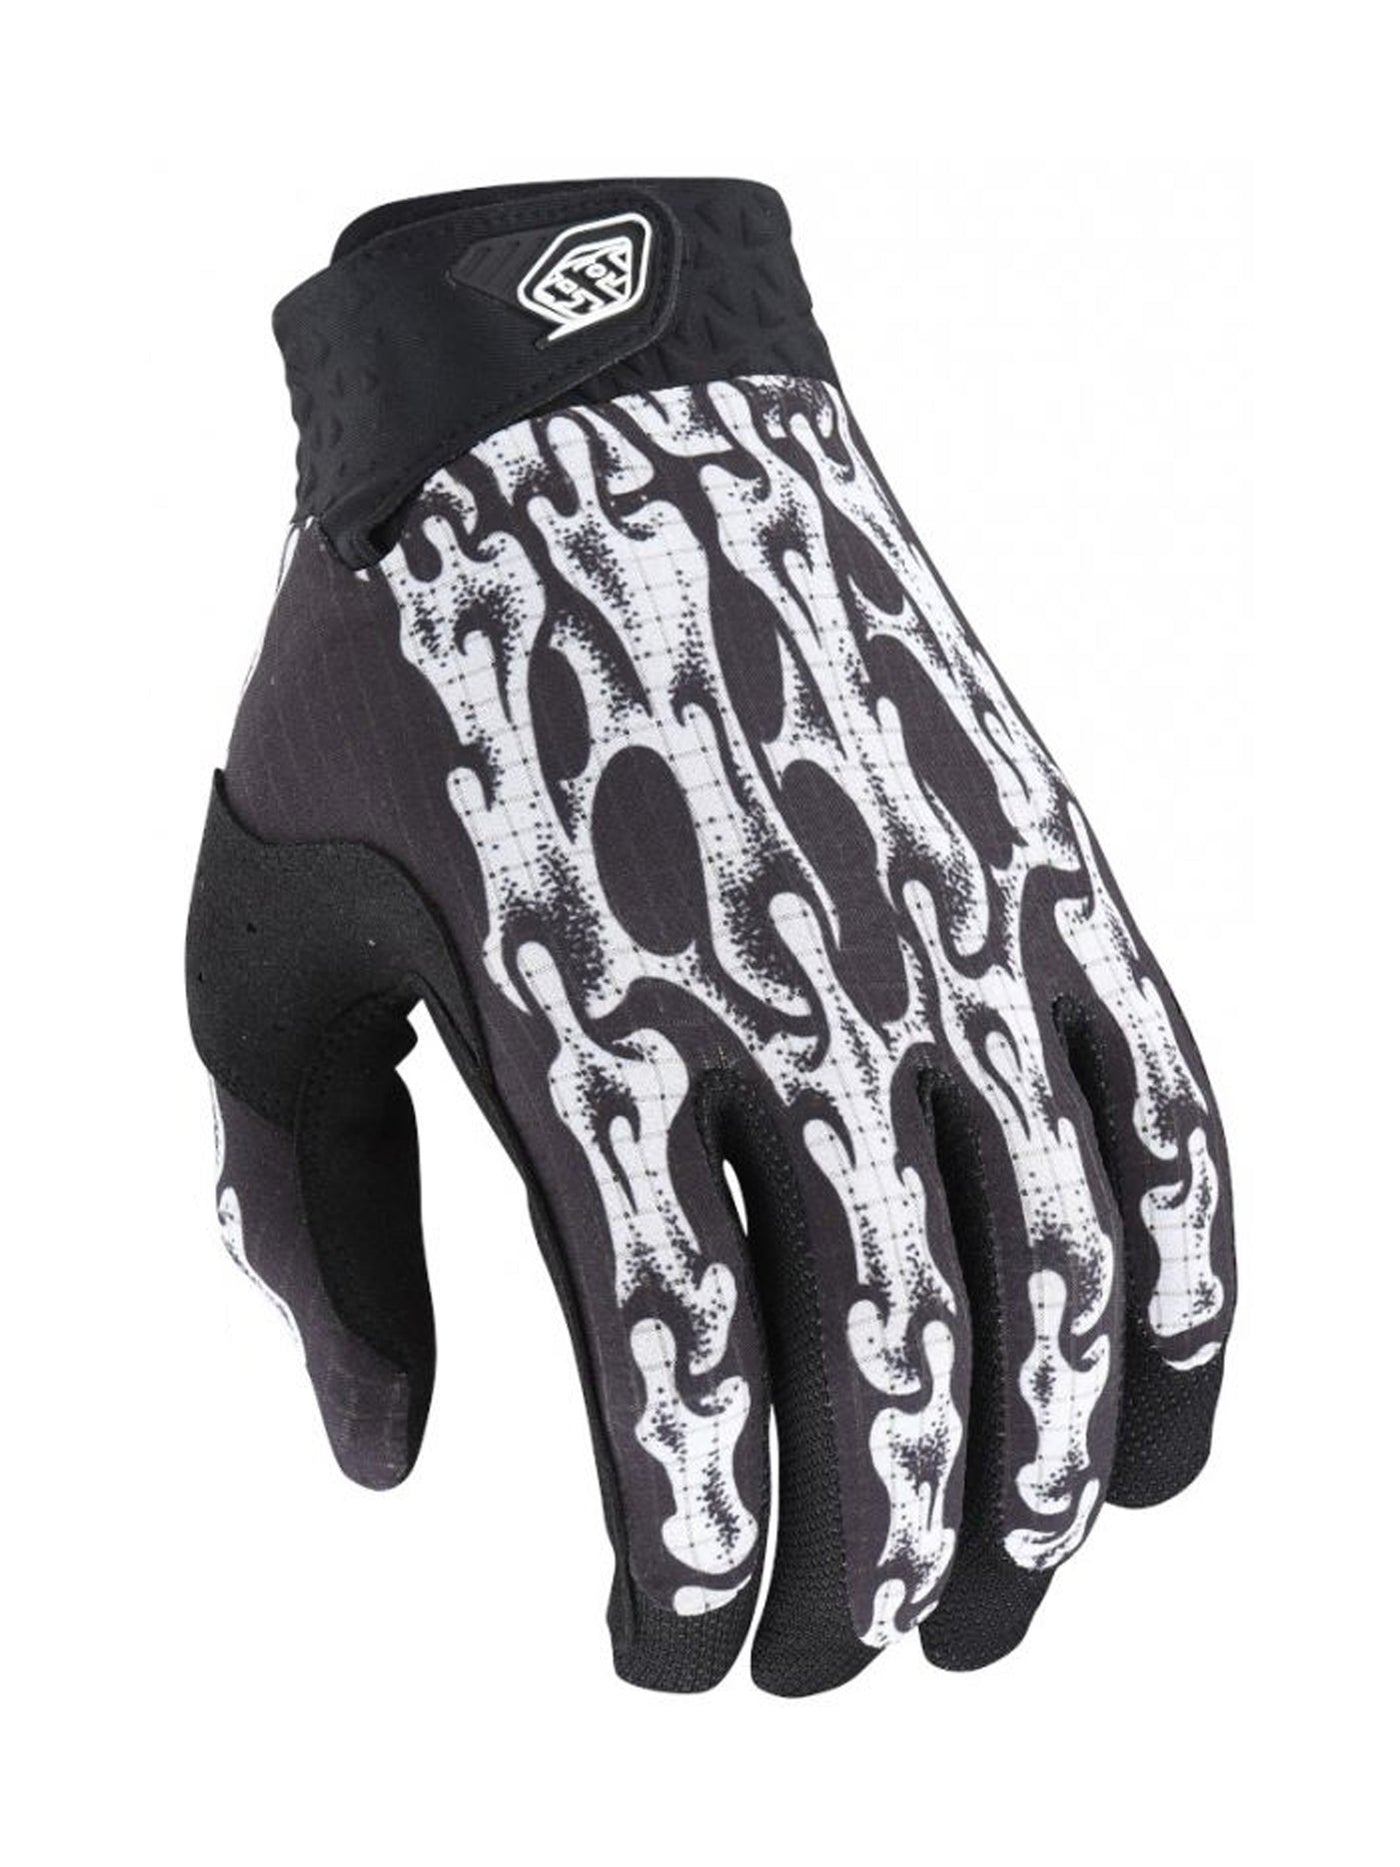 Troy Lee Designs guantes AIR smile hands negro blanco